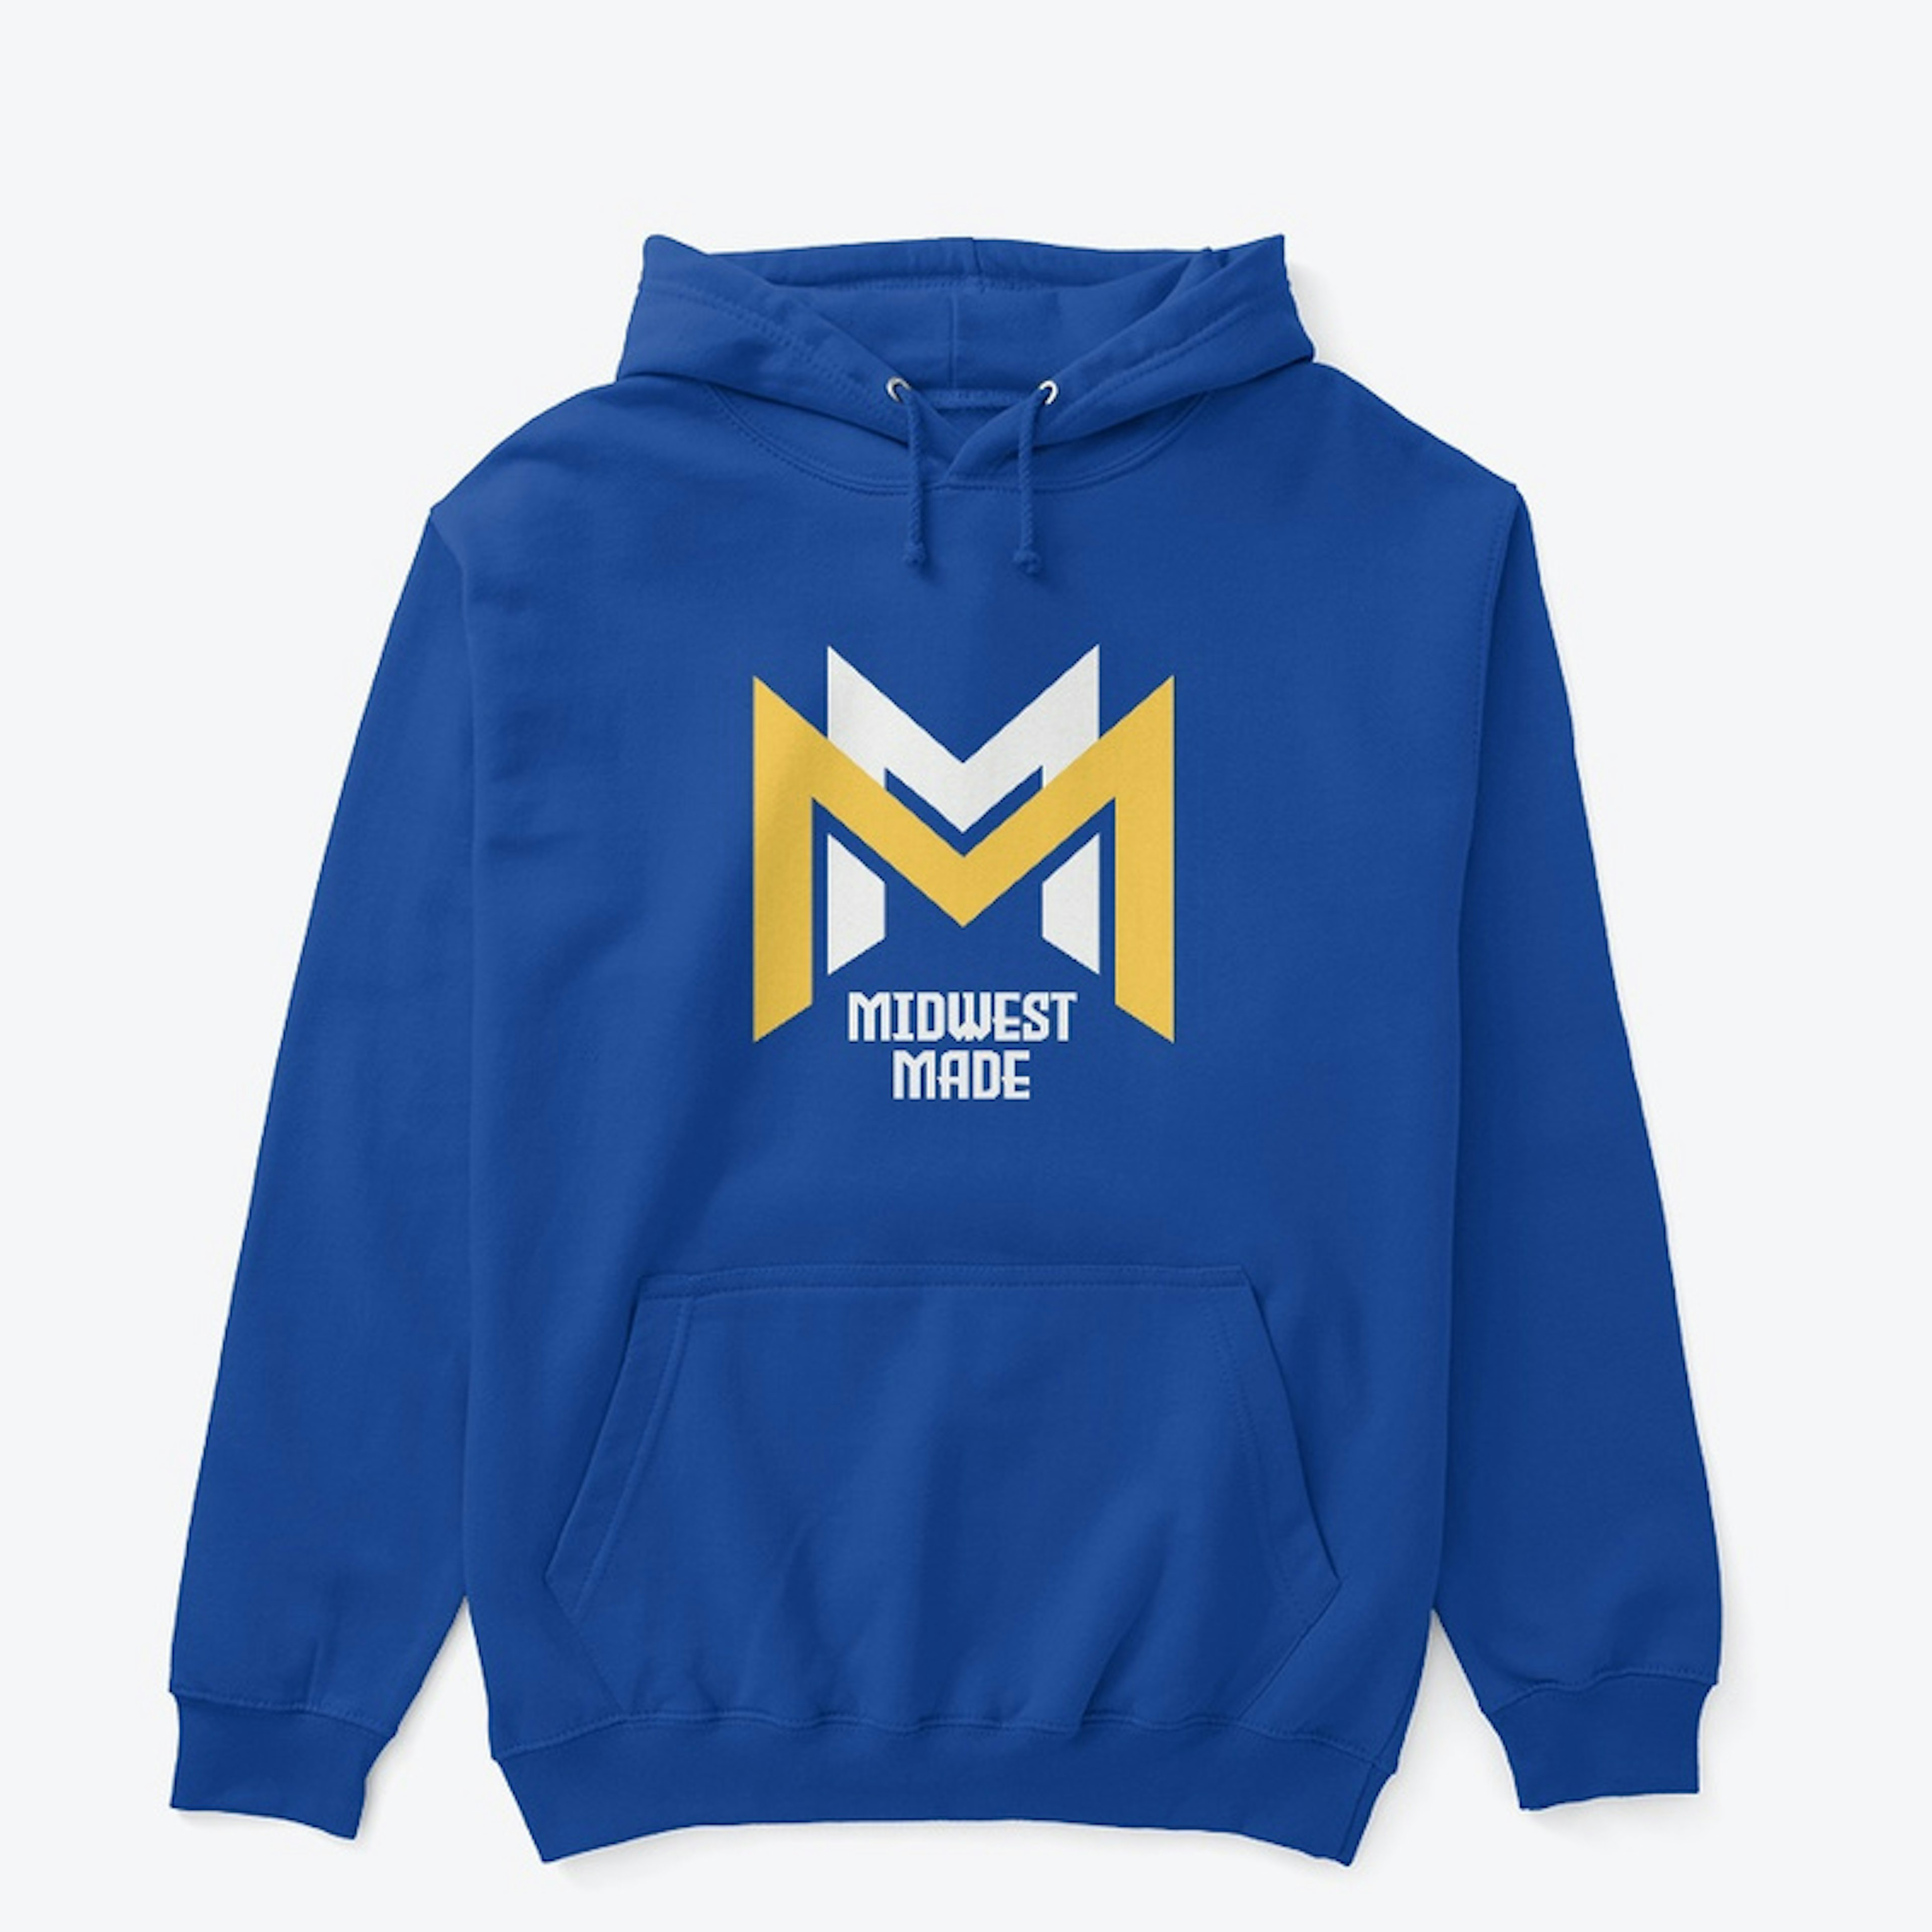 Midwest Made - "Classic Logo"